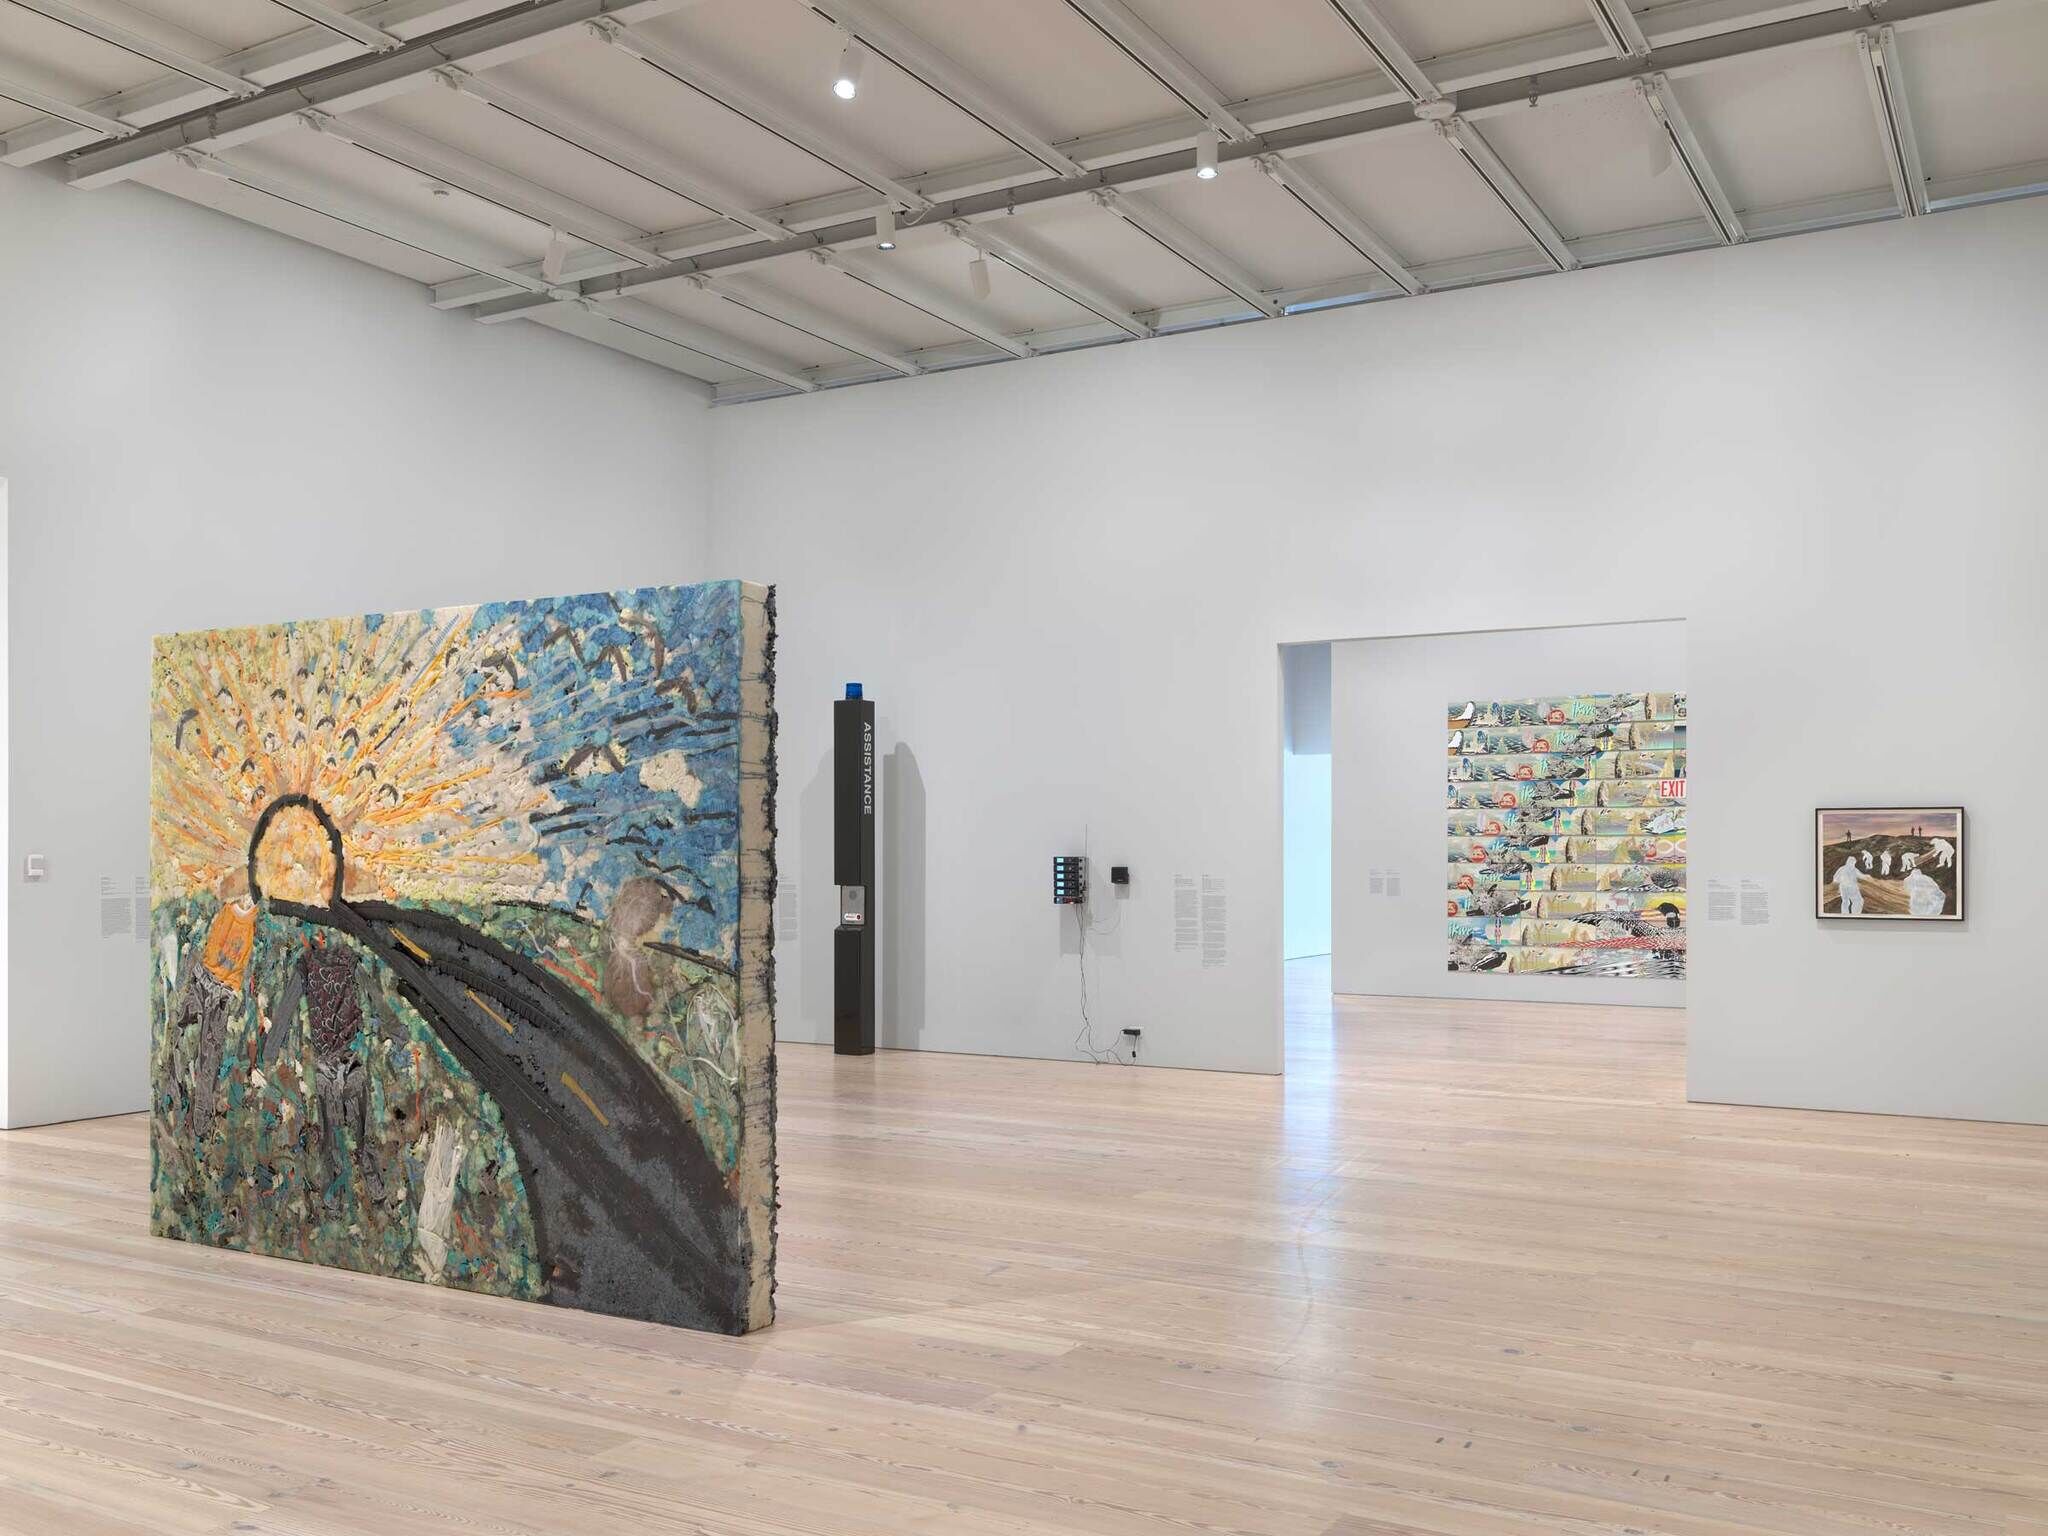 A big painting of a sun and a road standing in the middle of the room. In the background there is a emergency blue light pole and through the open doorway into the other gallery there are more paintings.